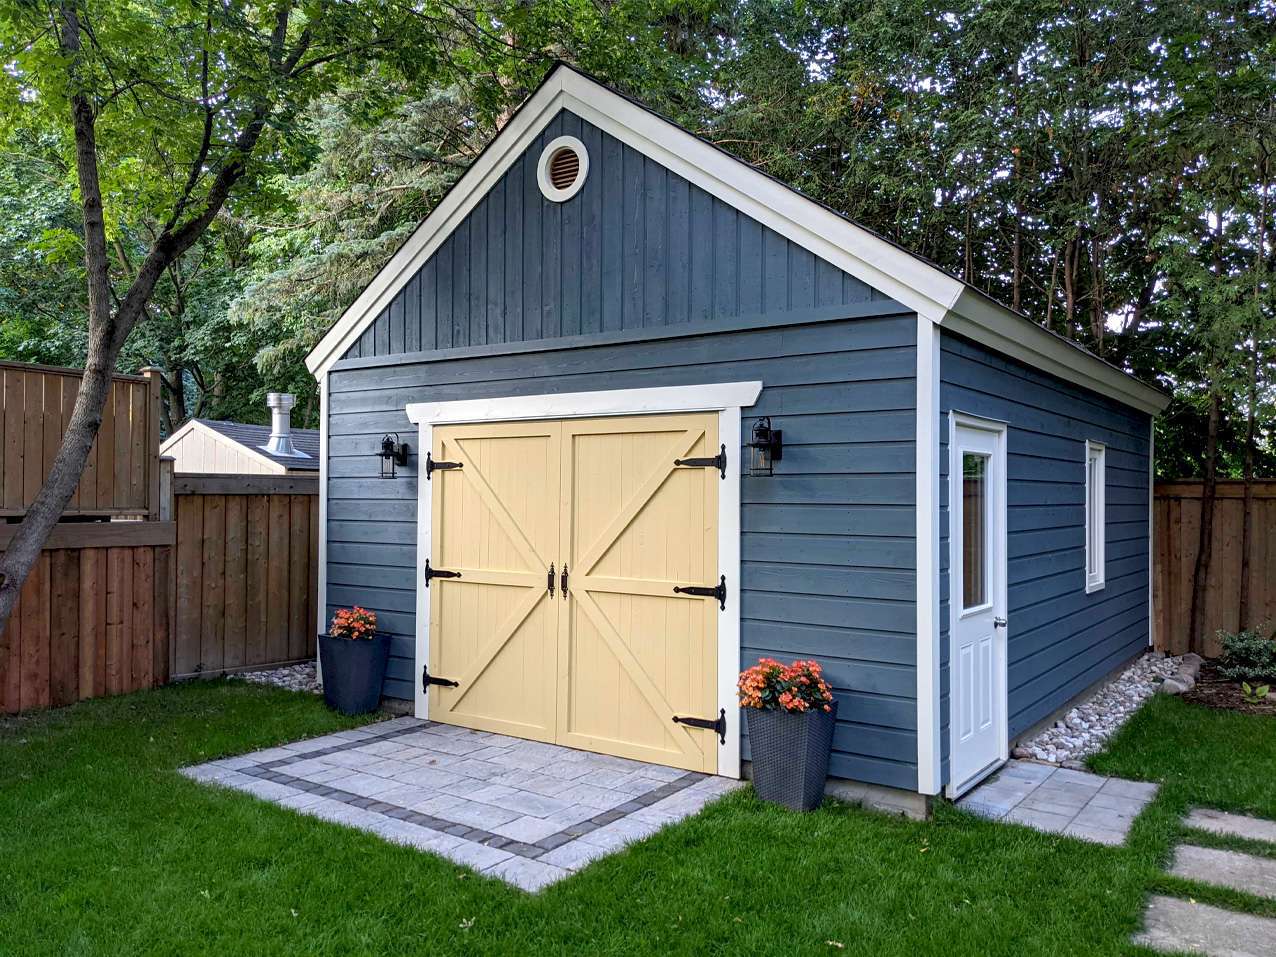 Front view of 16' x 22' Montcrest Garage located in Markham, Ontario – Summerwood Products